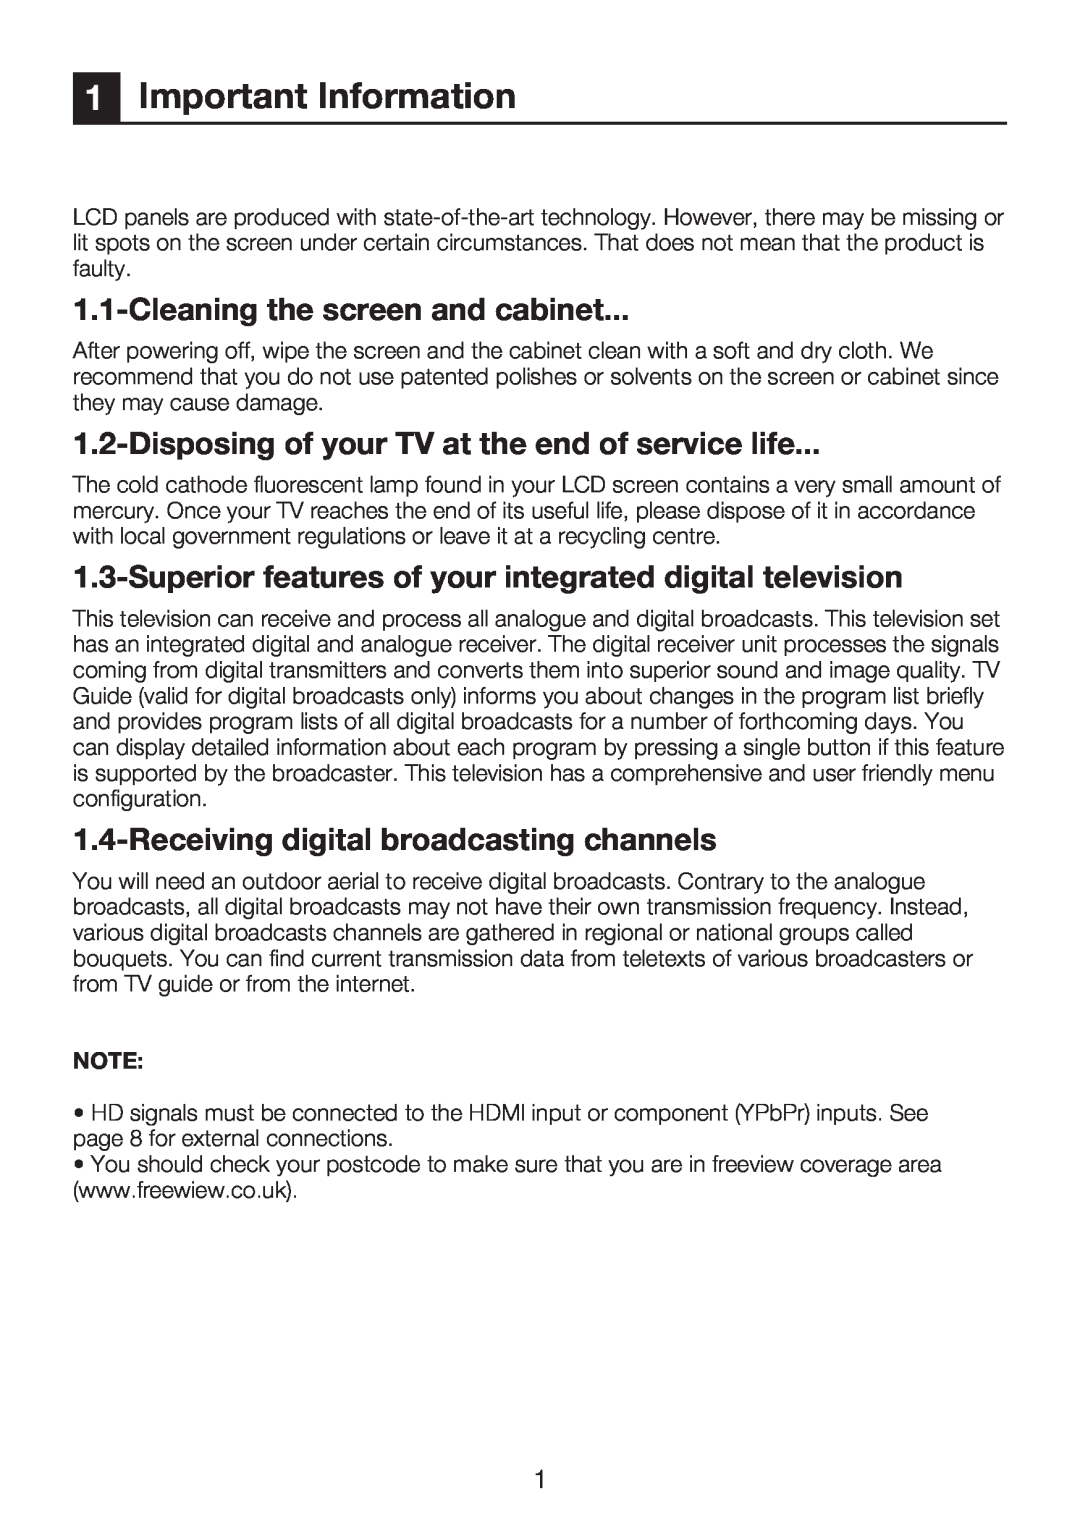 Beko 40WLU550FHID Important Information, Cleaning the screen and cabinet, Disposing of your TV at the end of service life 